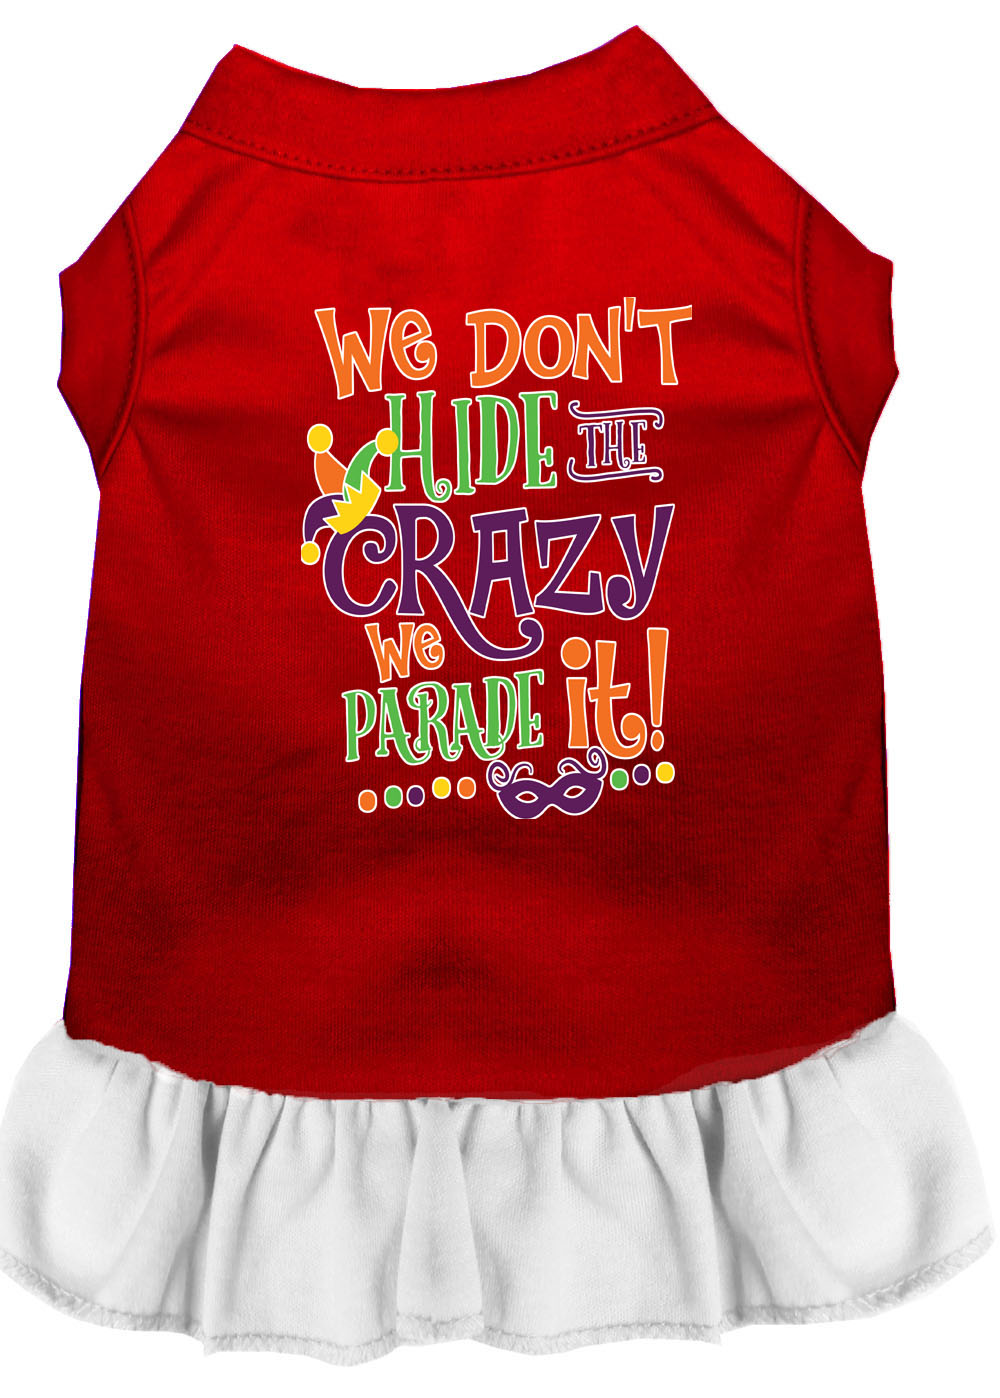 We Don't Hide the Crazy Screen Print Mardi Gras Dog Dress Red with White XL